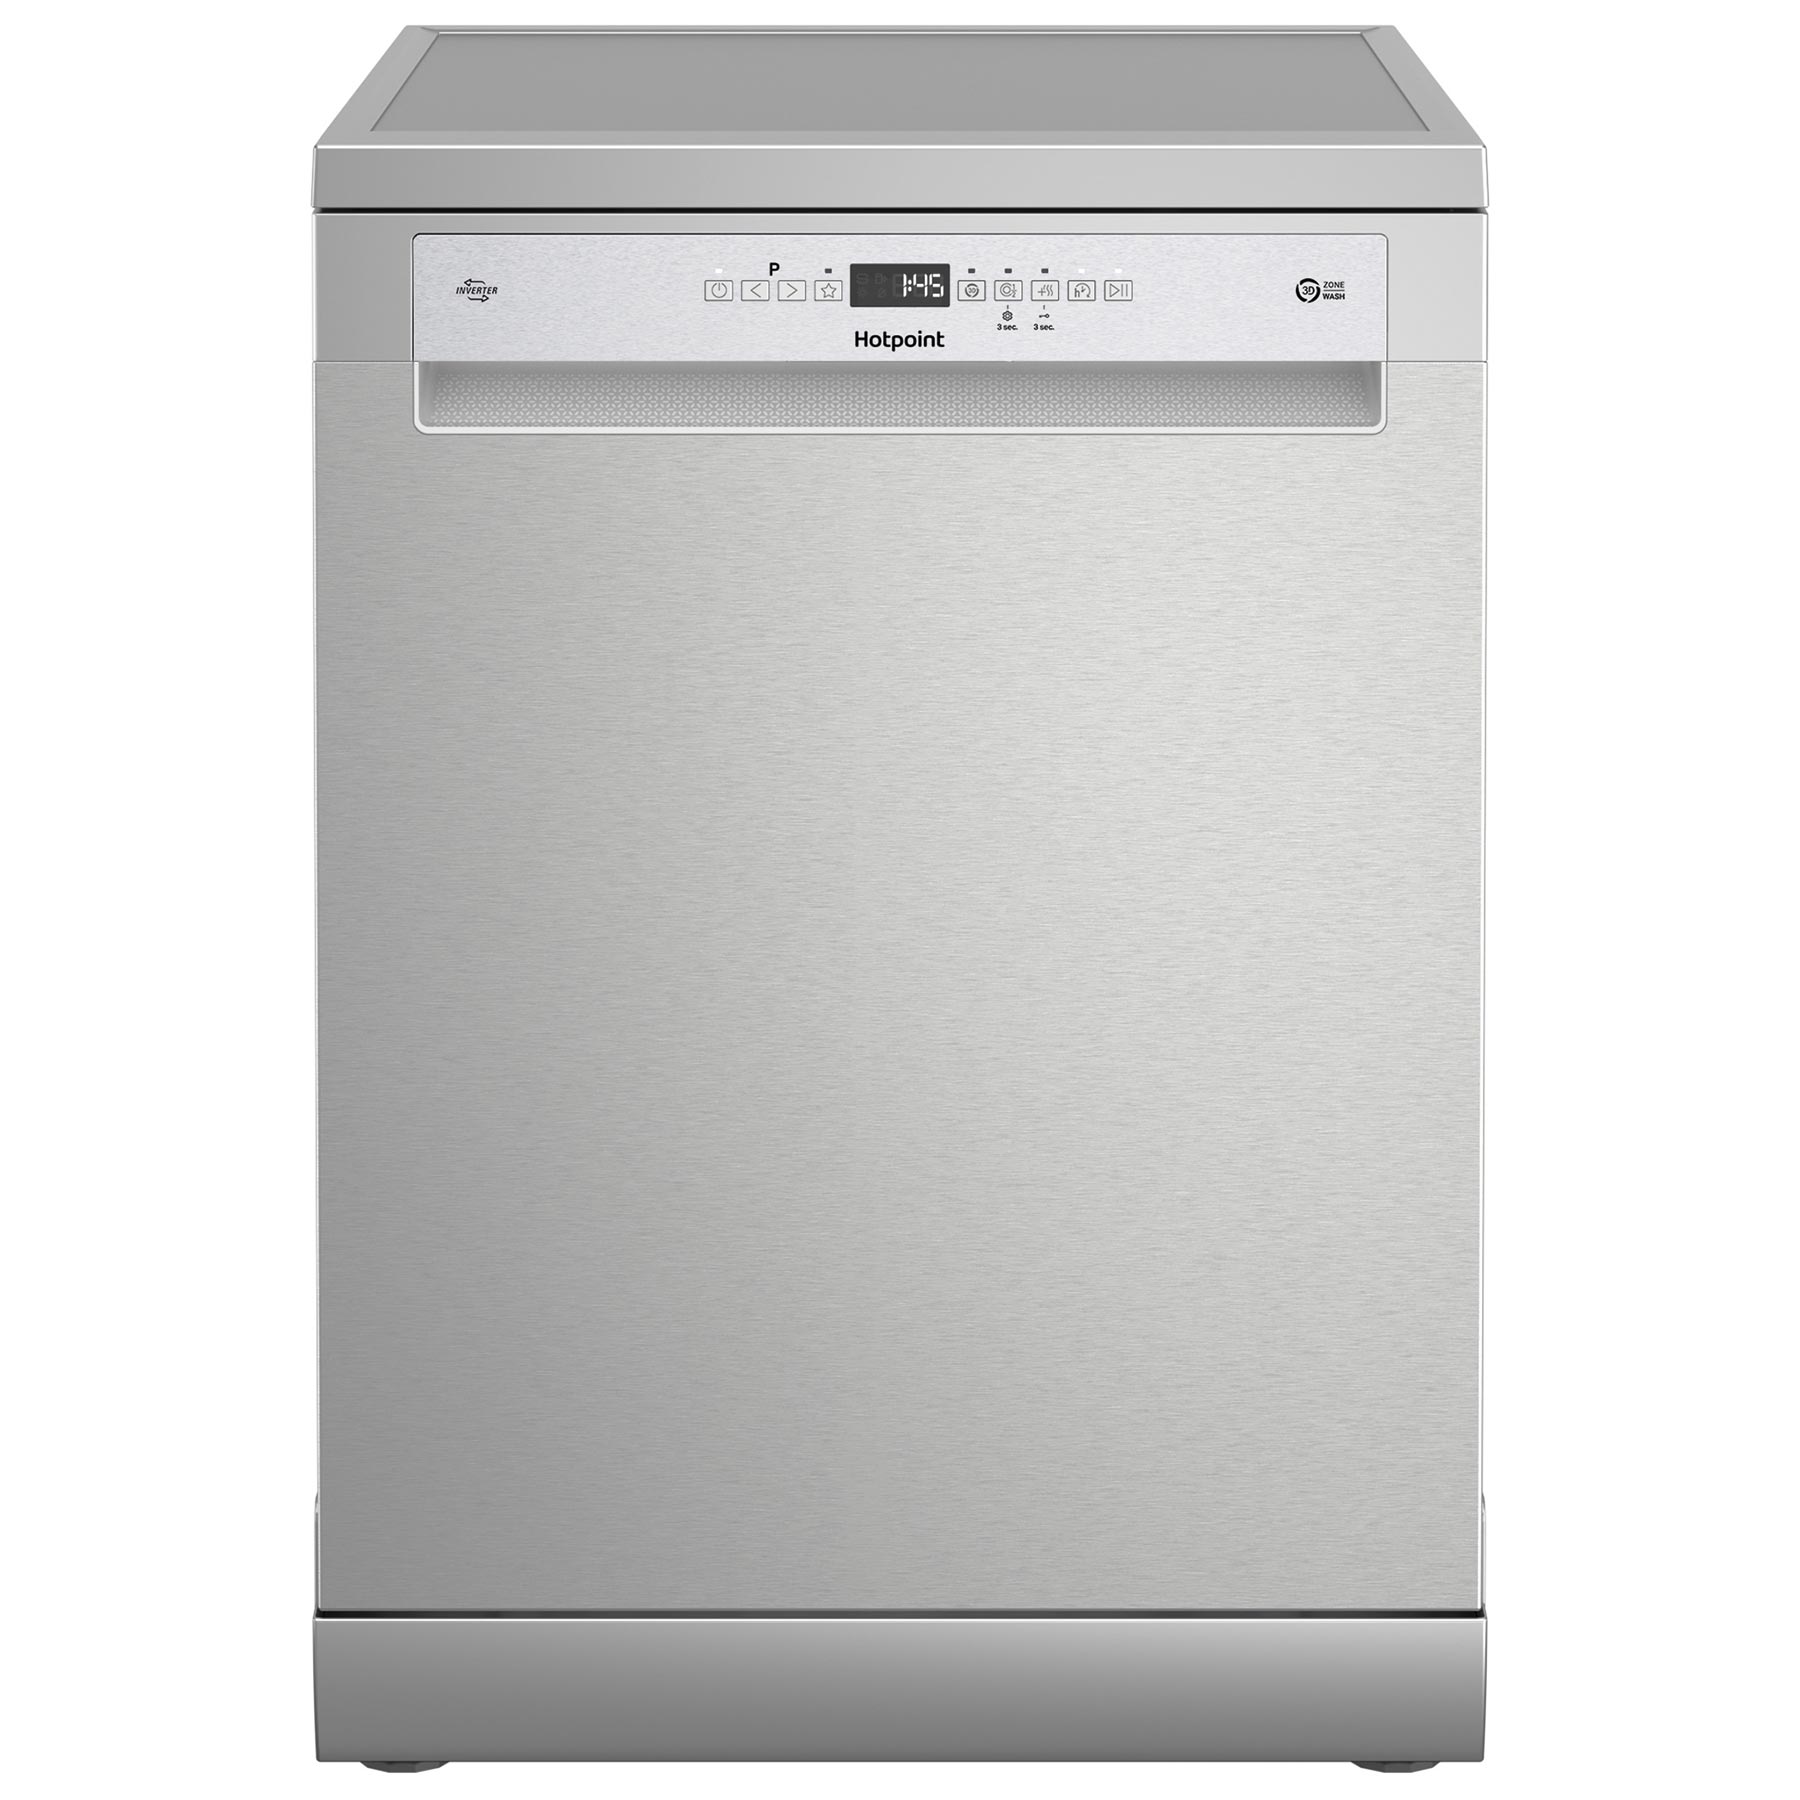 Image of Hotpoint H7FHP43X 60cm Dishwasher in Silver 15 Place Setting C Rated